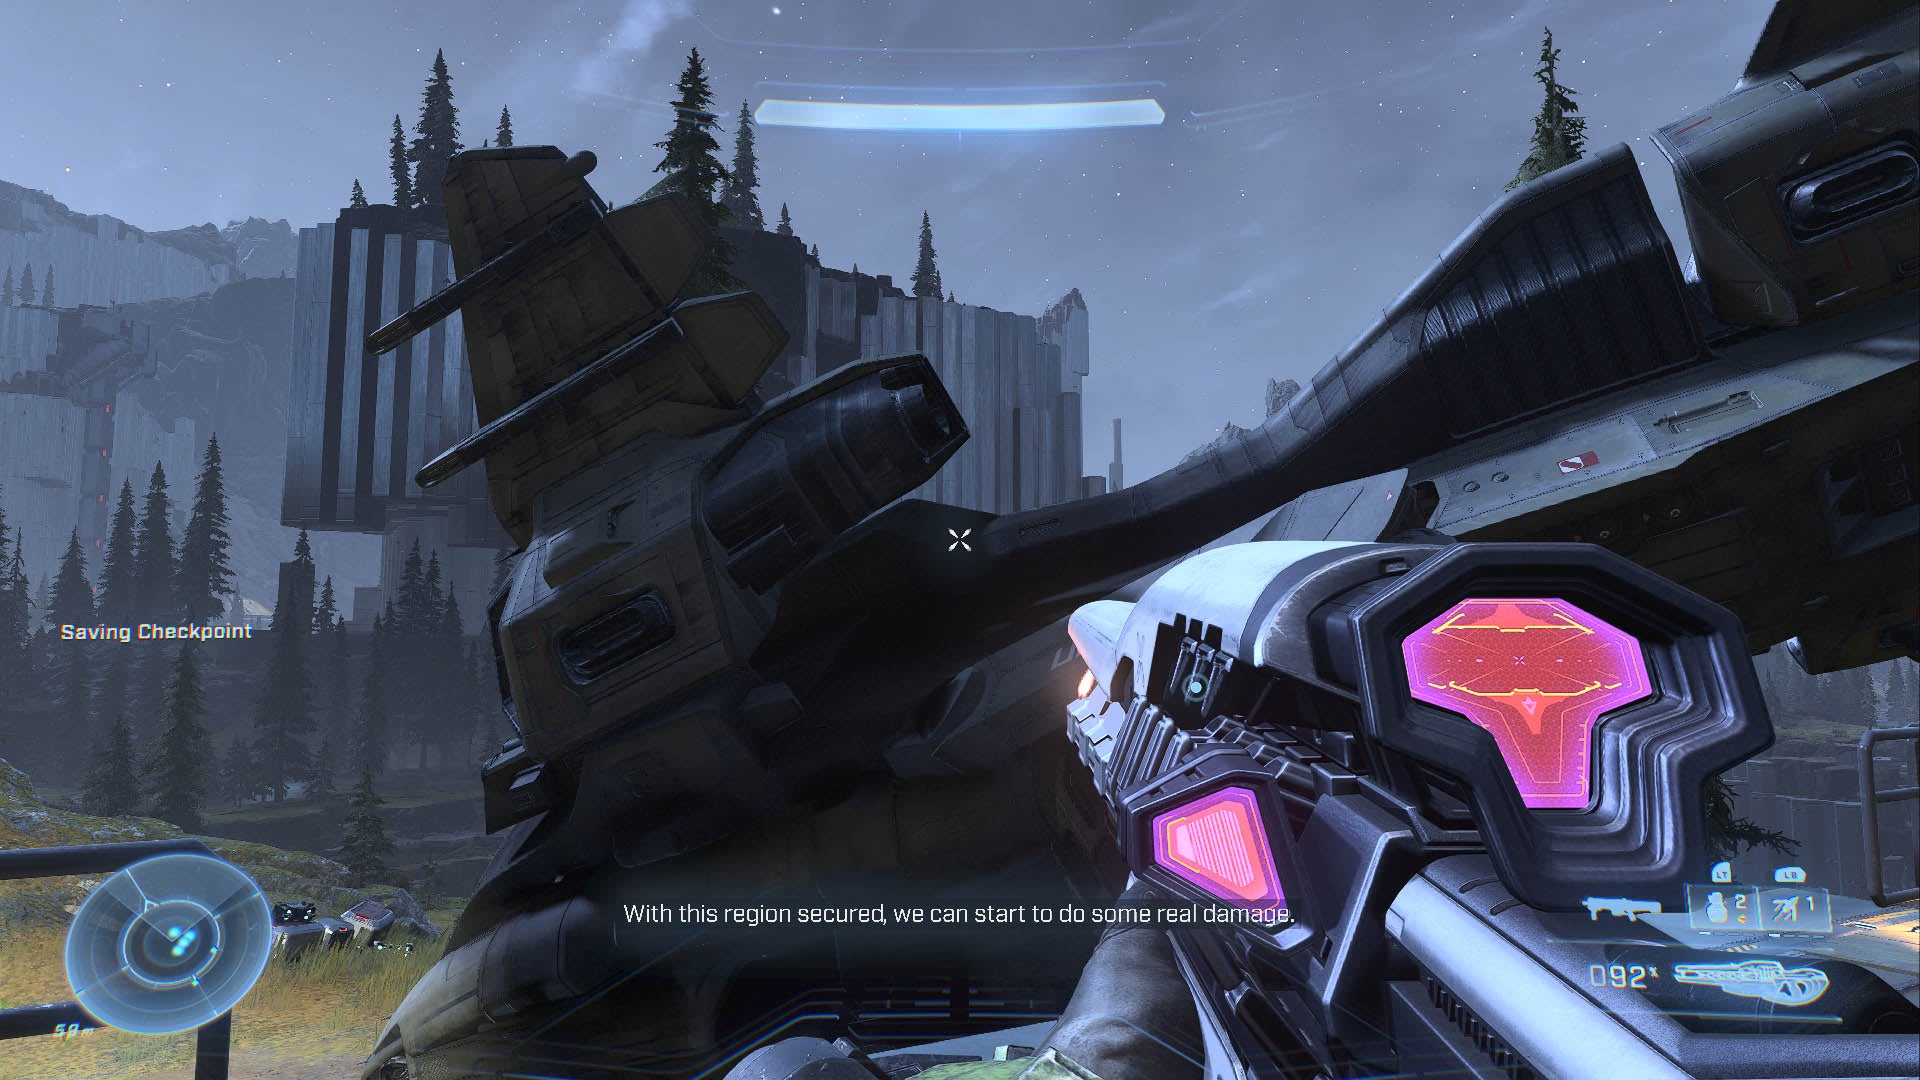 In case you ever feel bad about your own parking jobs... (Screenshot: 343 Industries / Kotaku)